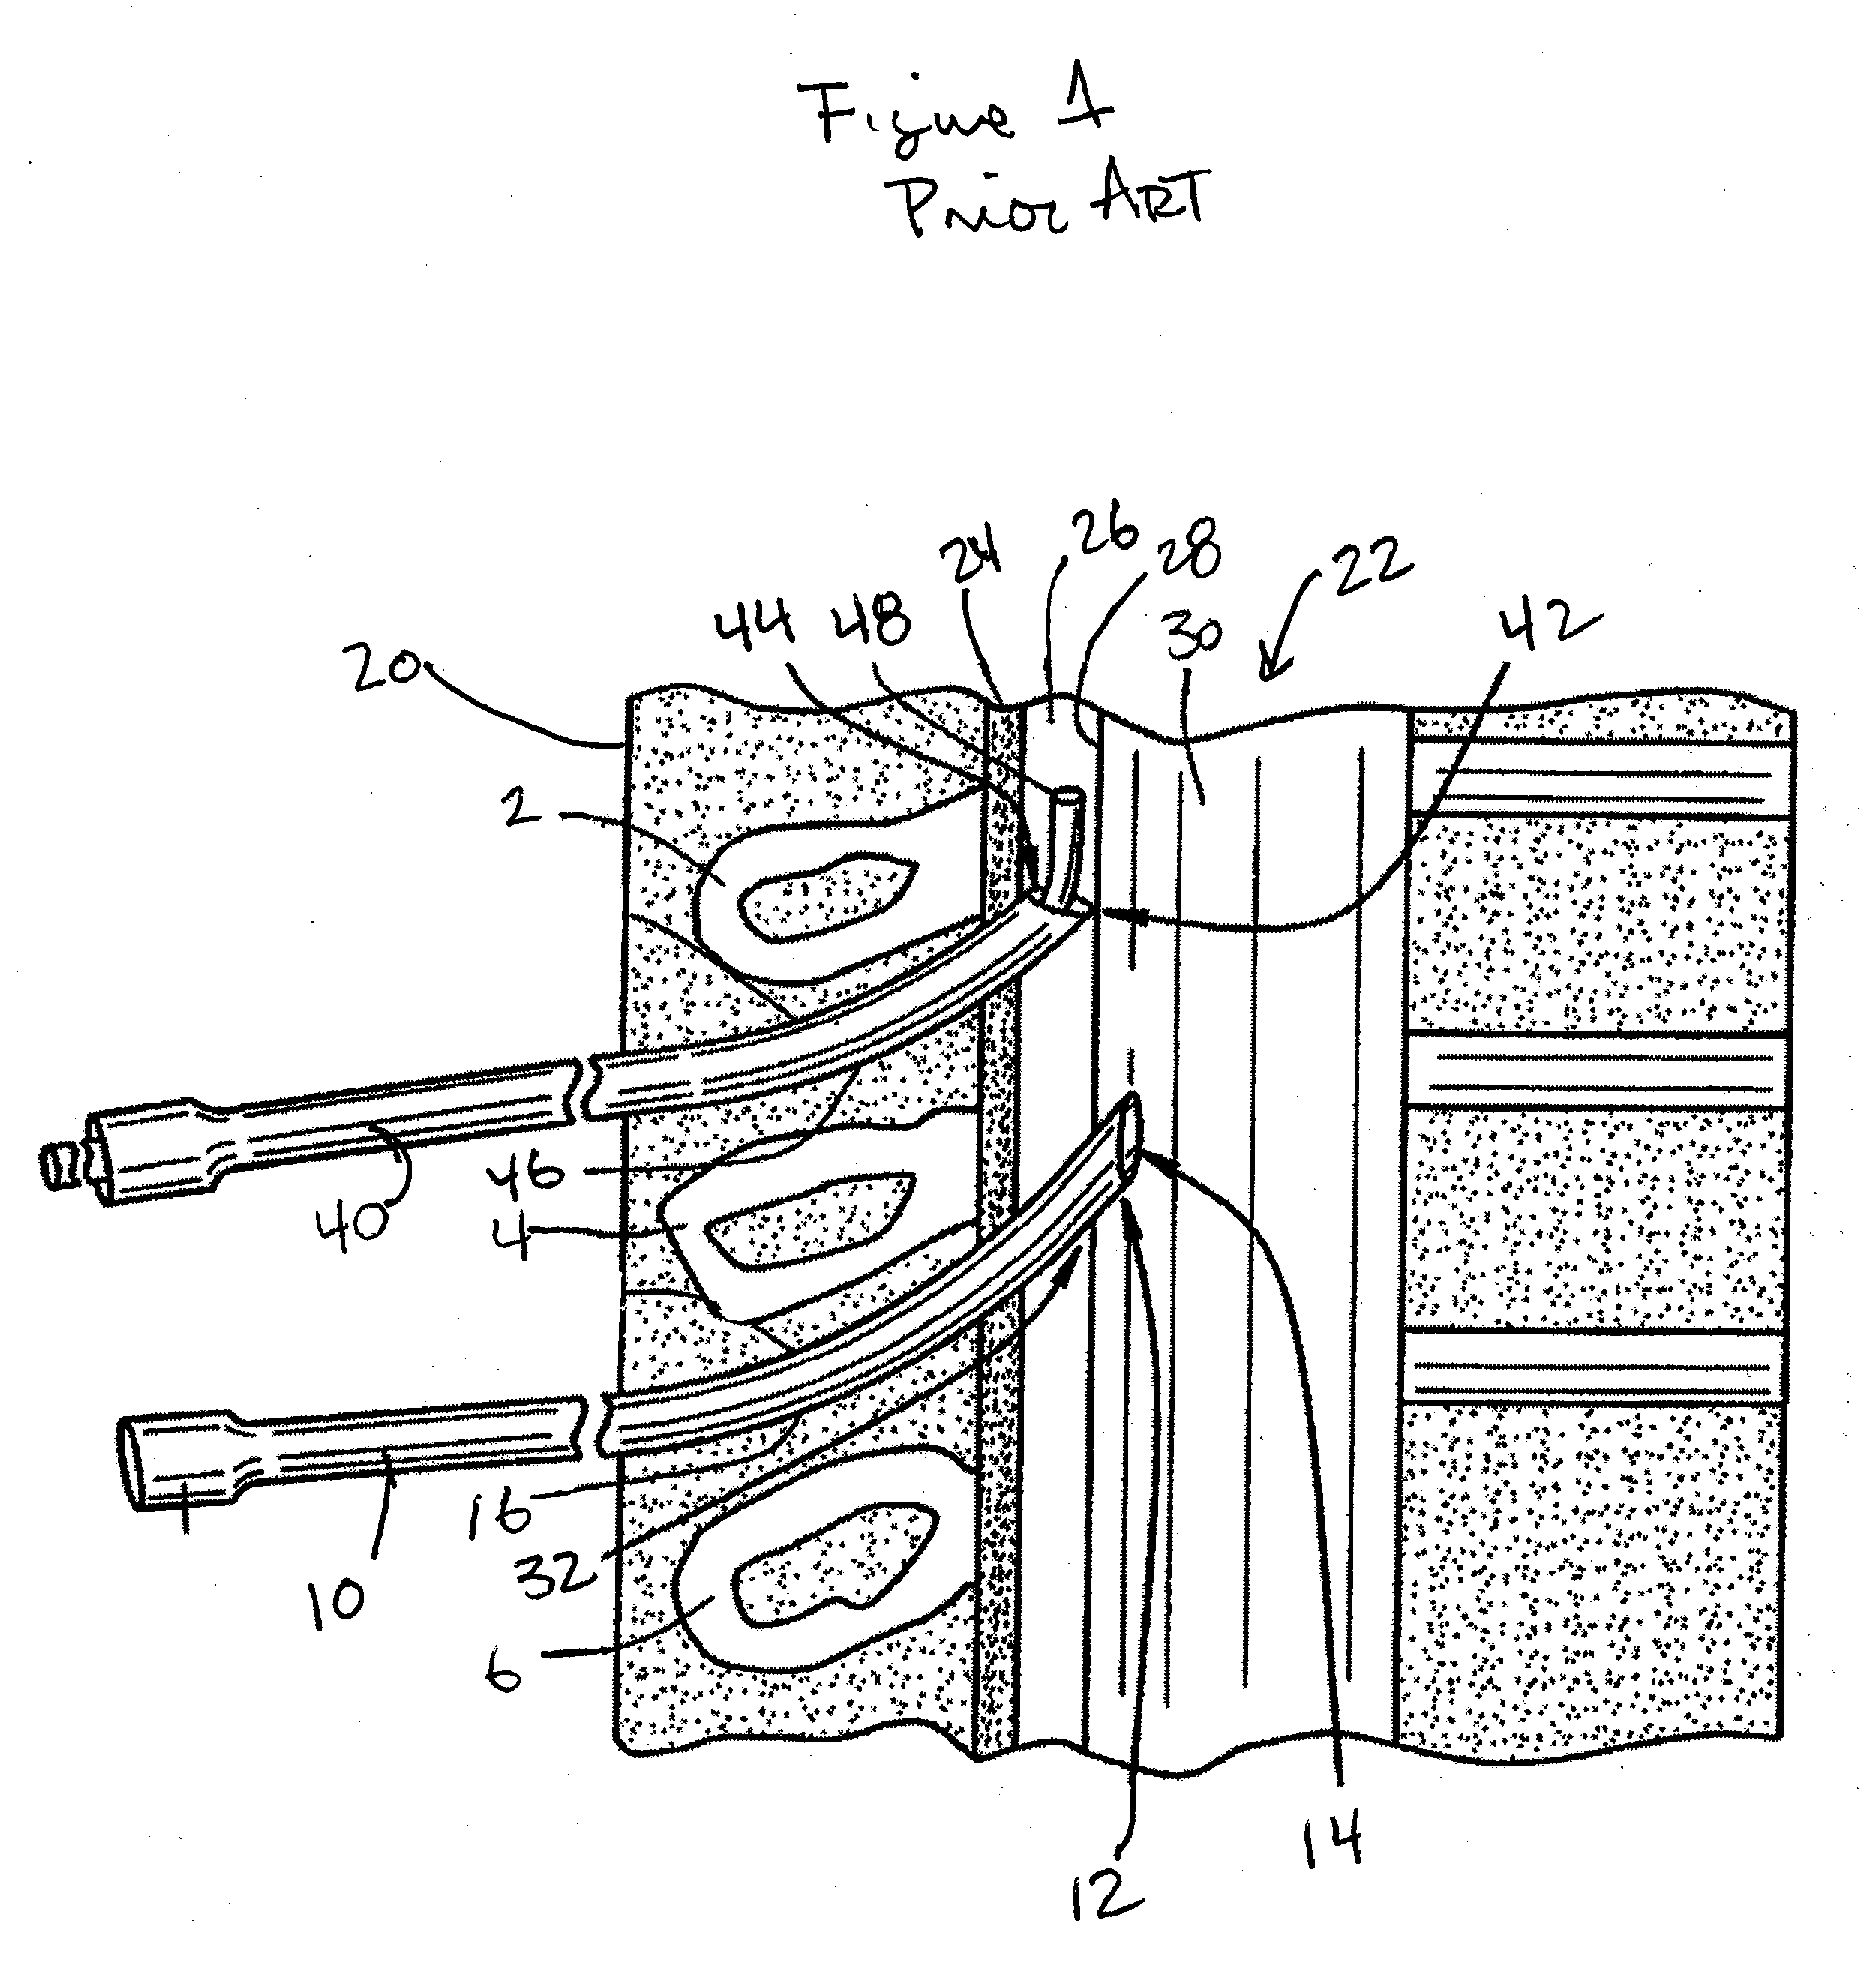 Spinal needle light guide apparatus and method of delivery